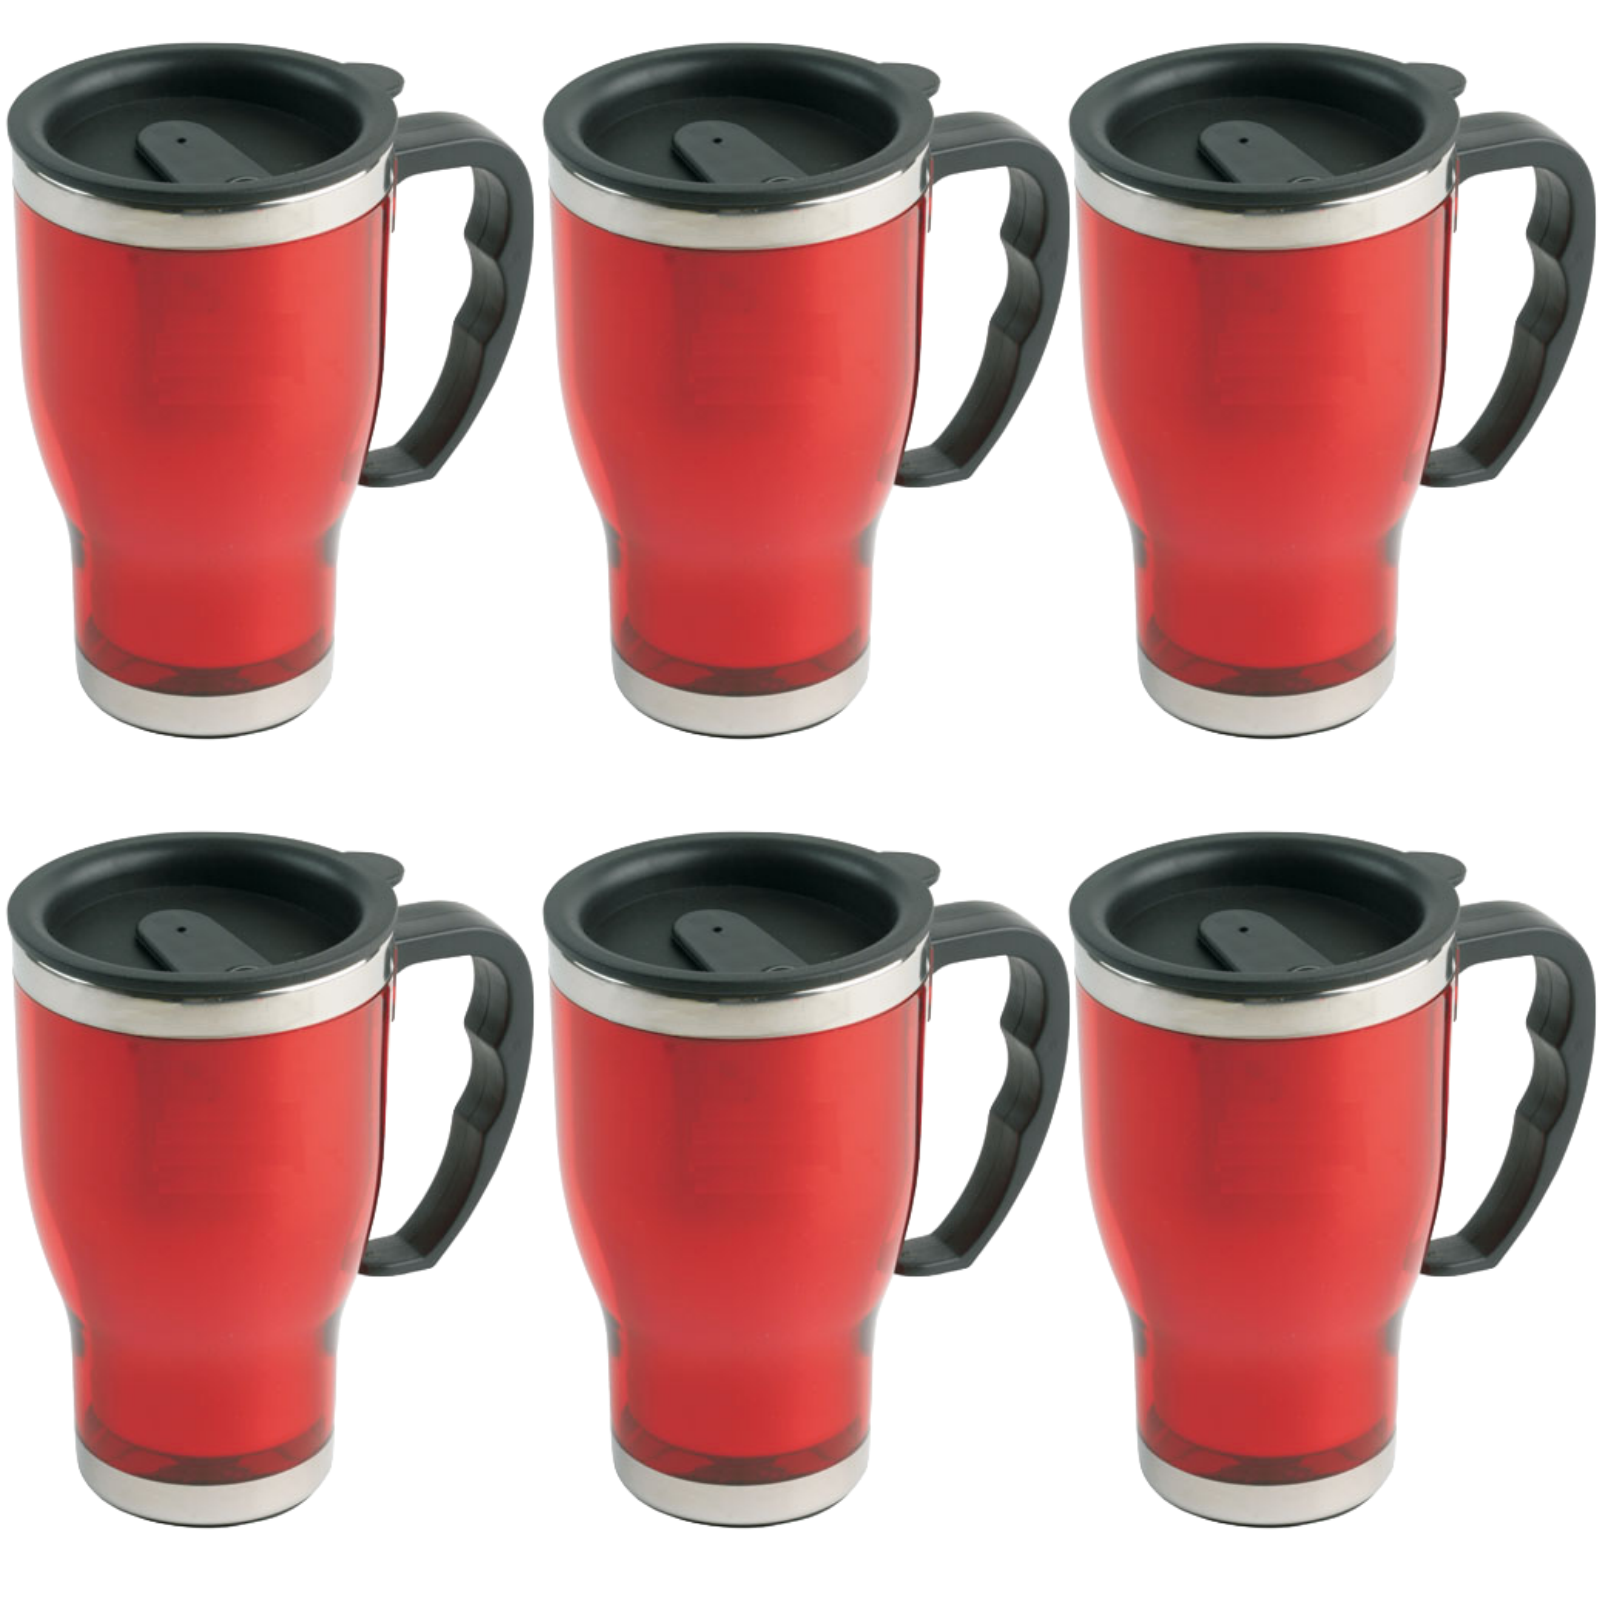 6x Explorer Mug Travel Cup Stainless Steel Insulated Coffee Thermal Bottle - Red